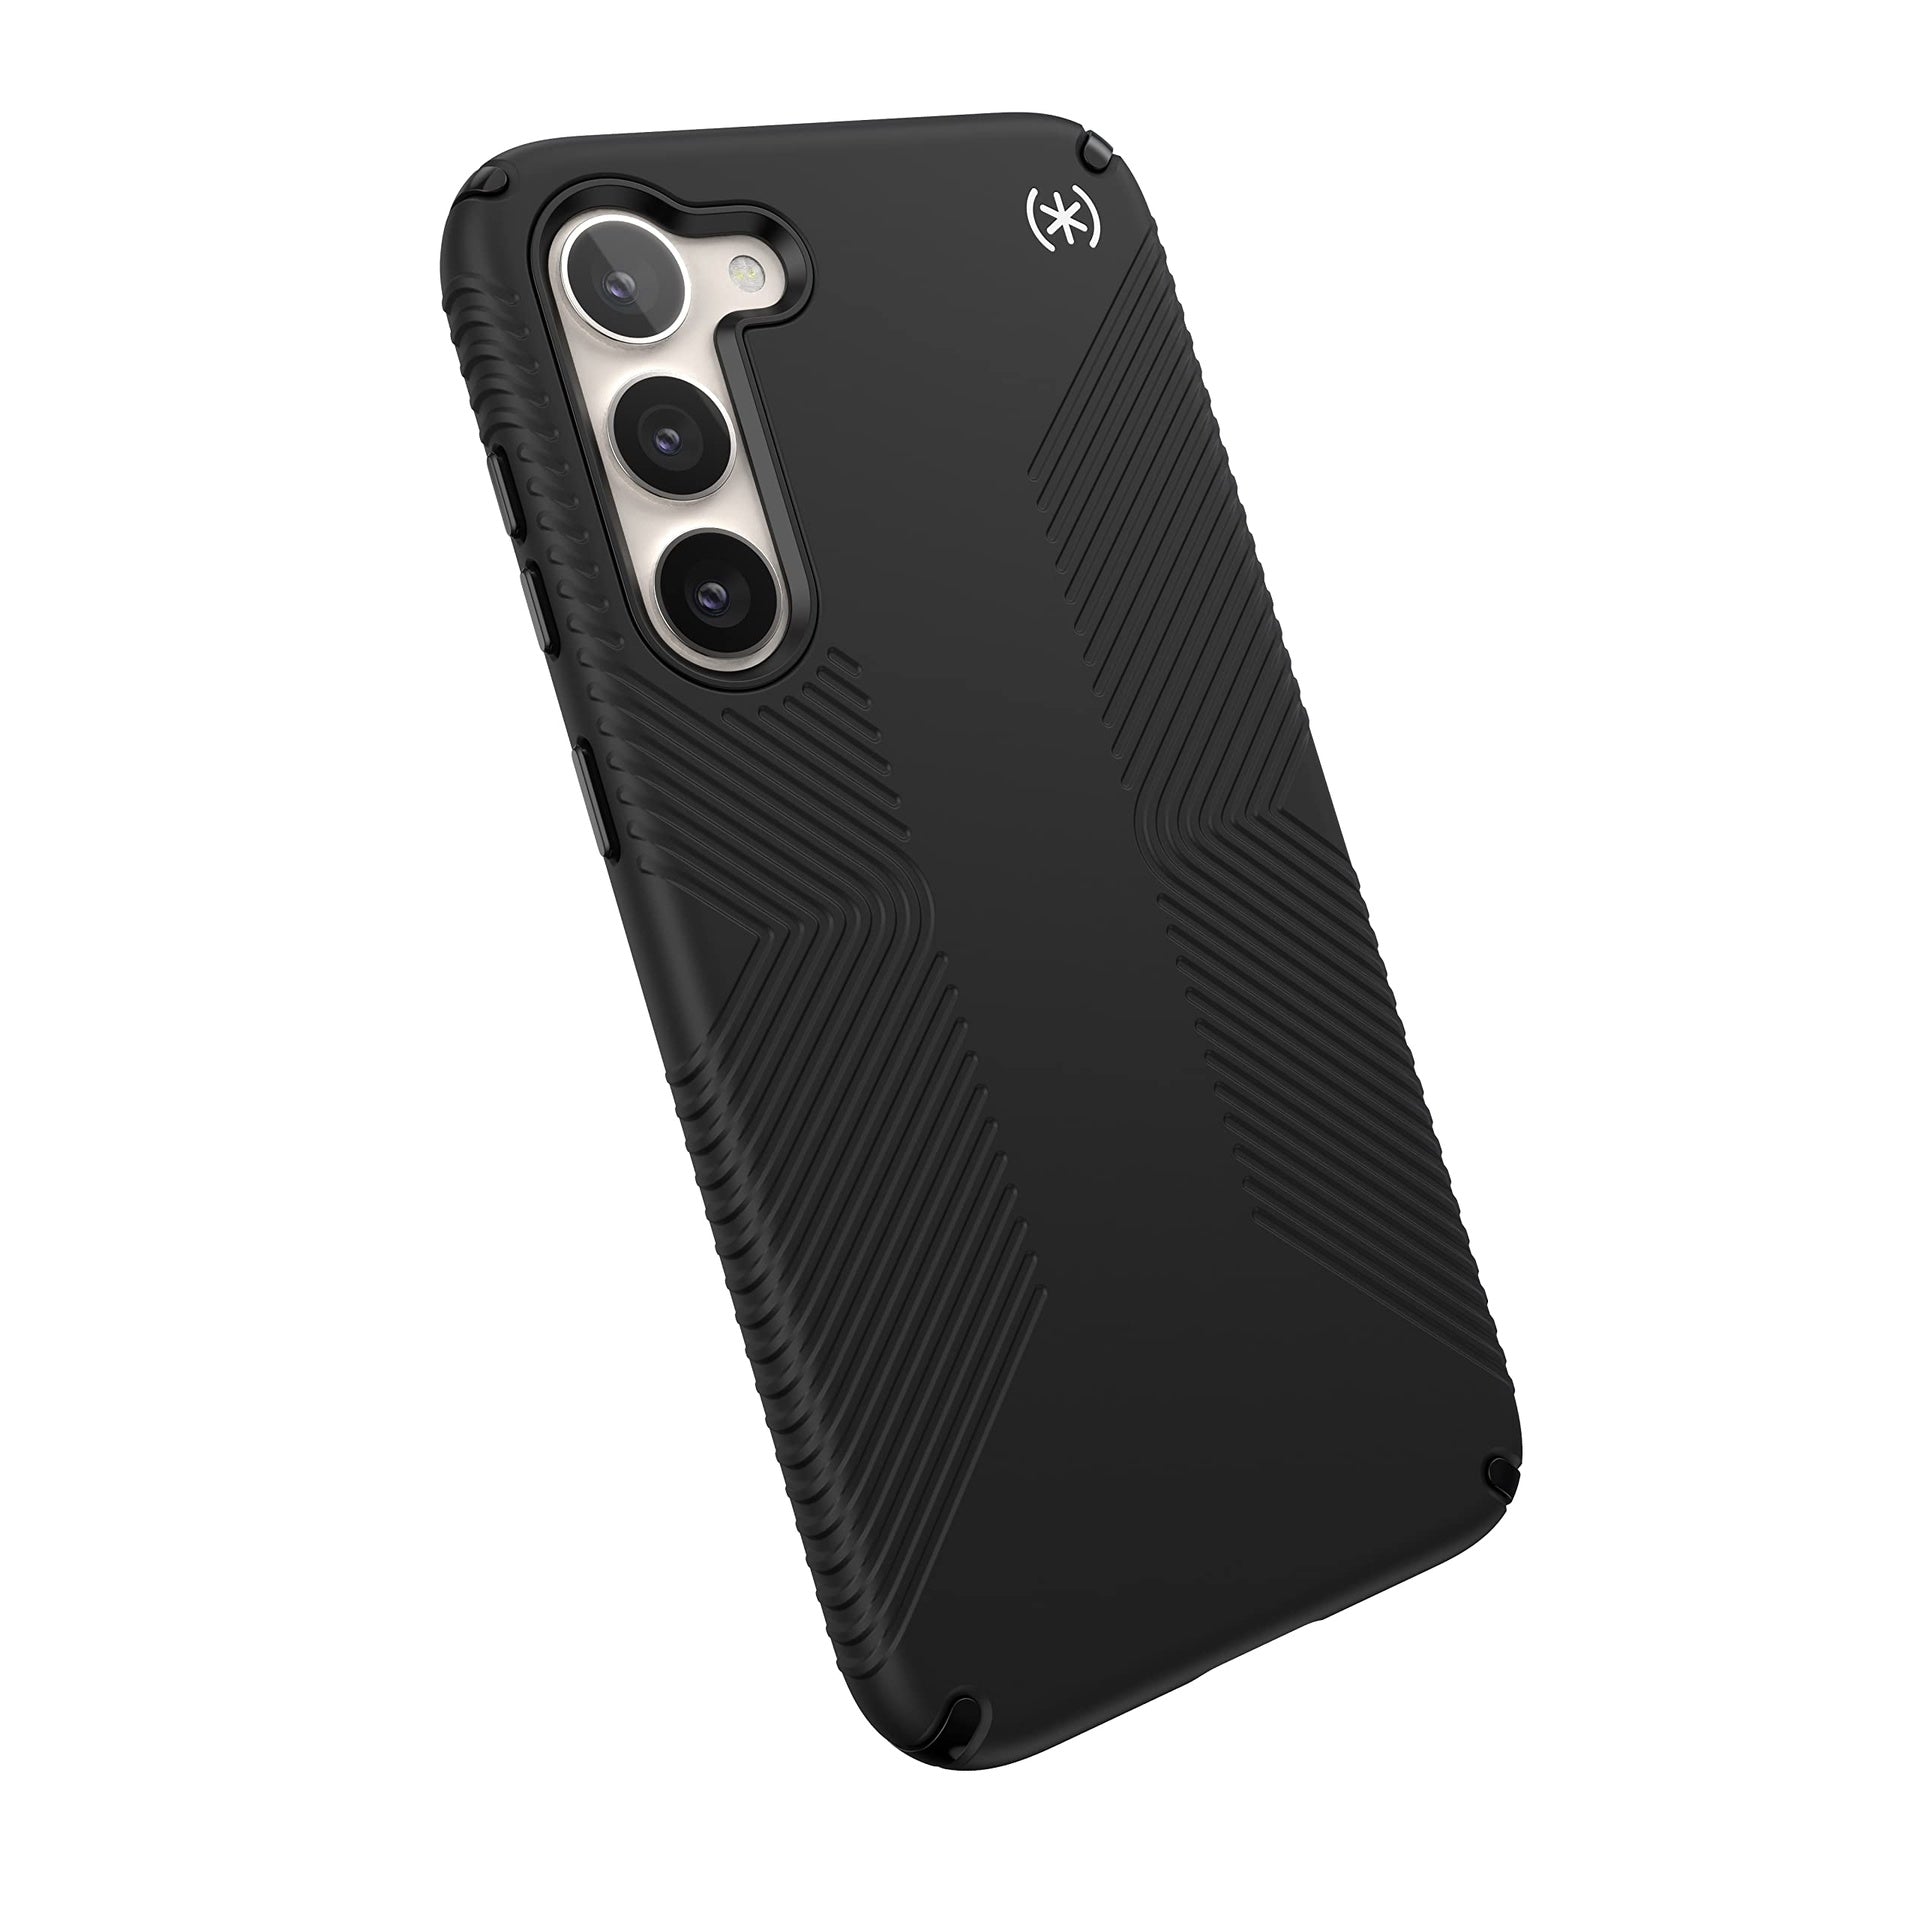 Speck Presidio 2 Grip Samsung Galaxy S23+ Case Drop & Camera Protection, Soft-Touch Secure Grip, Wireless Charging Compatible, Shock Absorbant, Galaxy S23+ Case Black